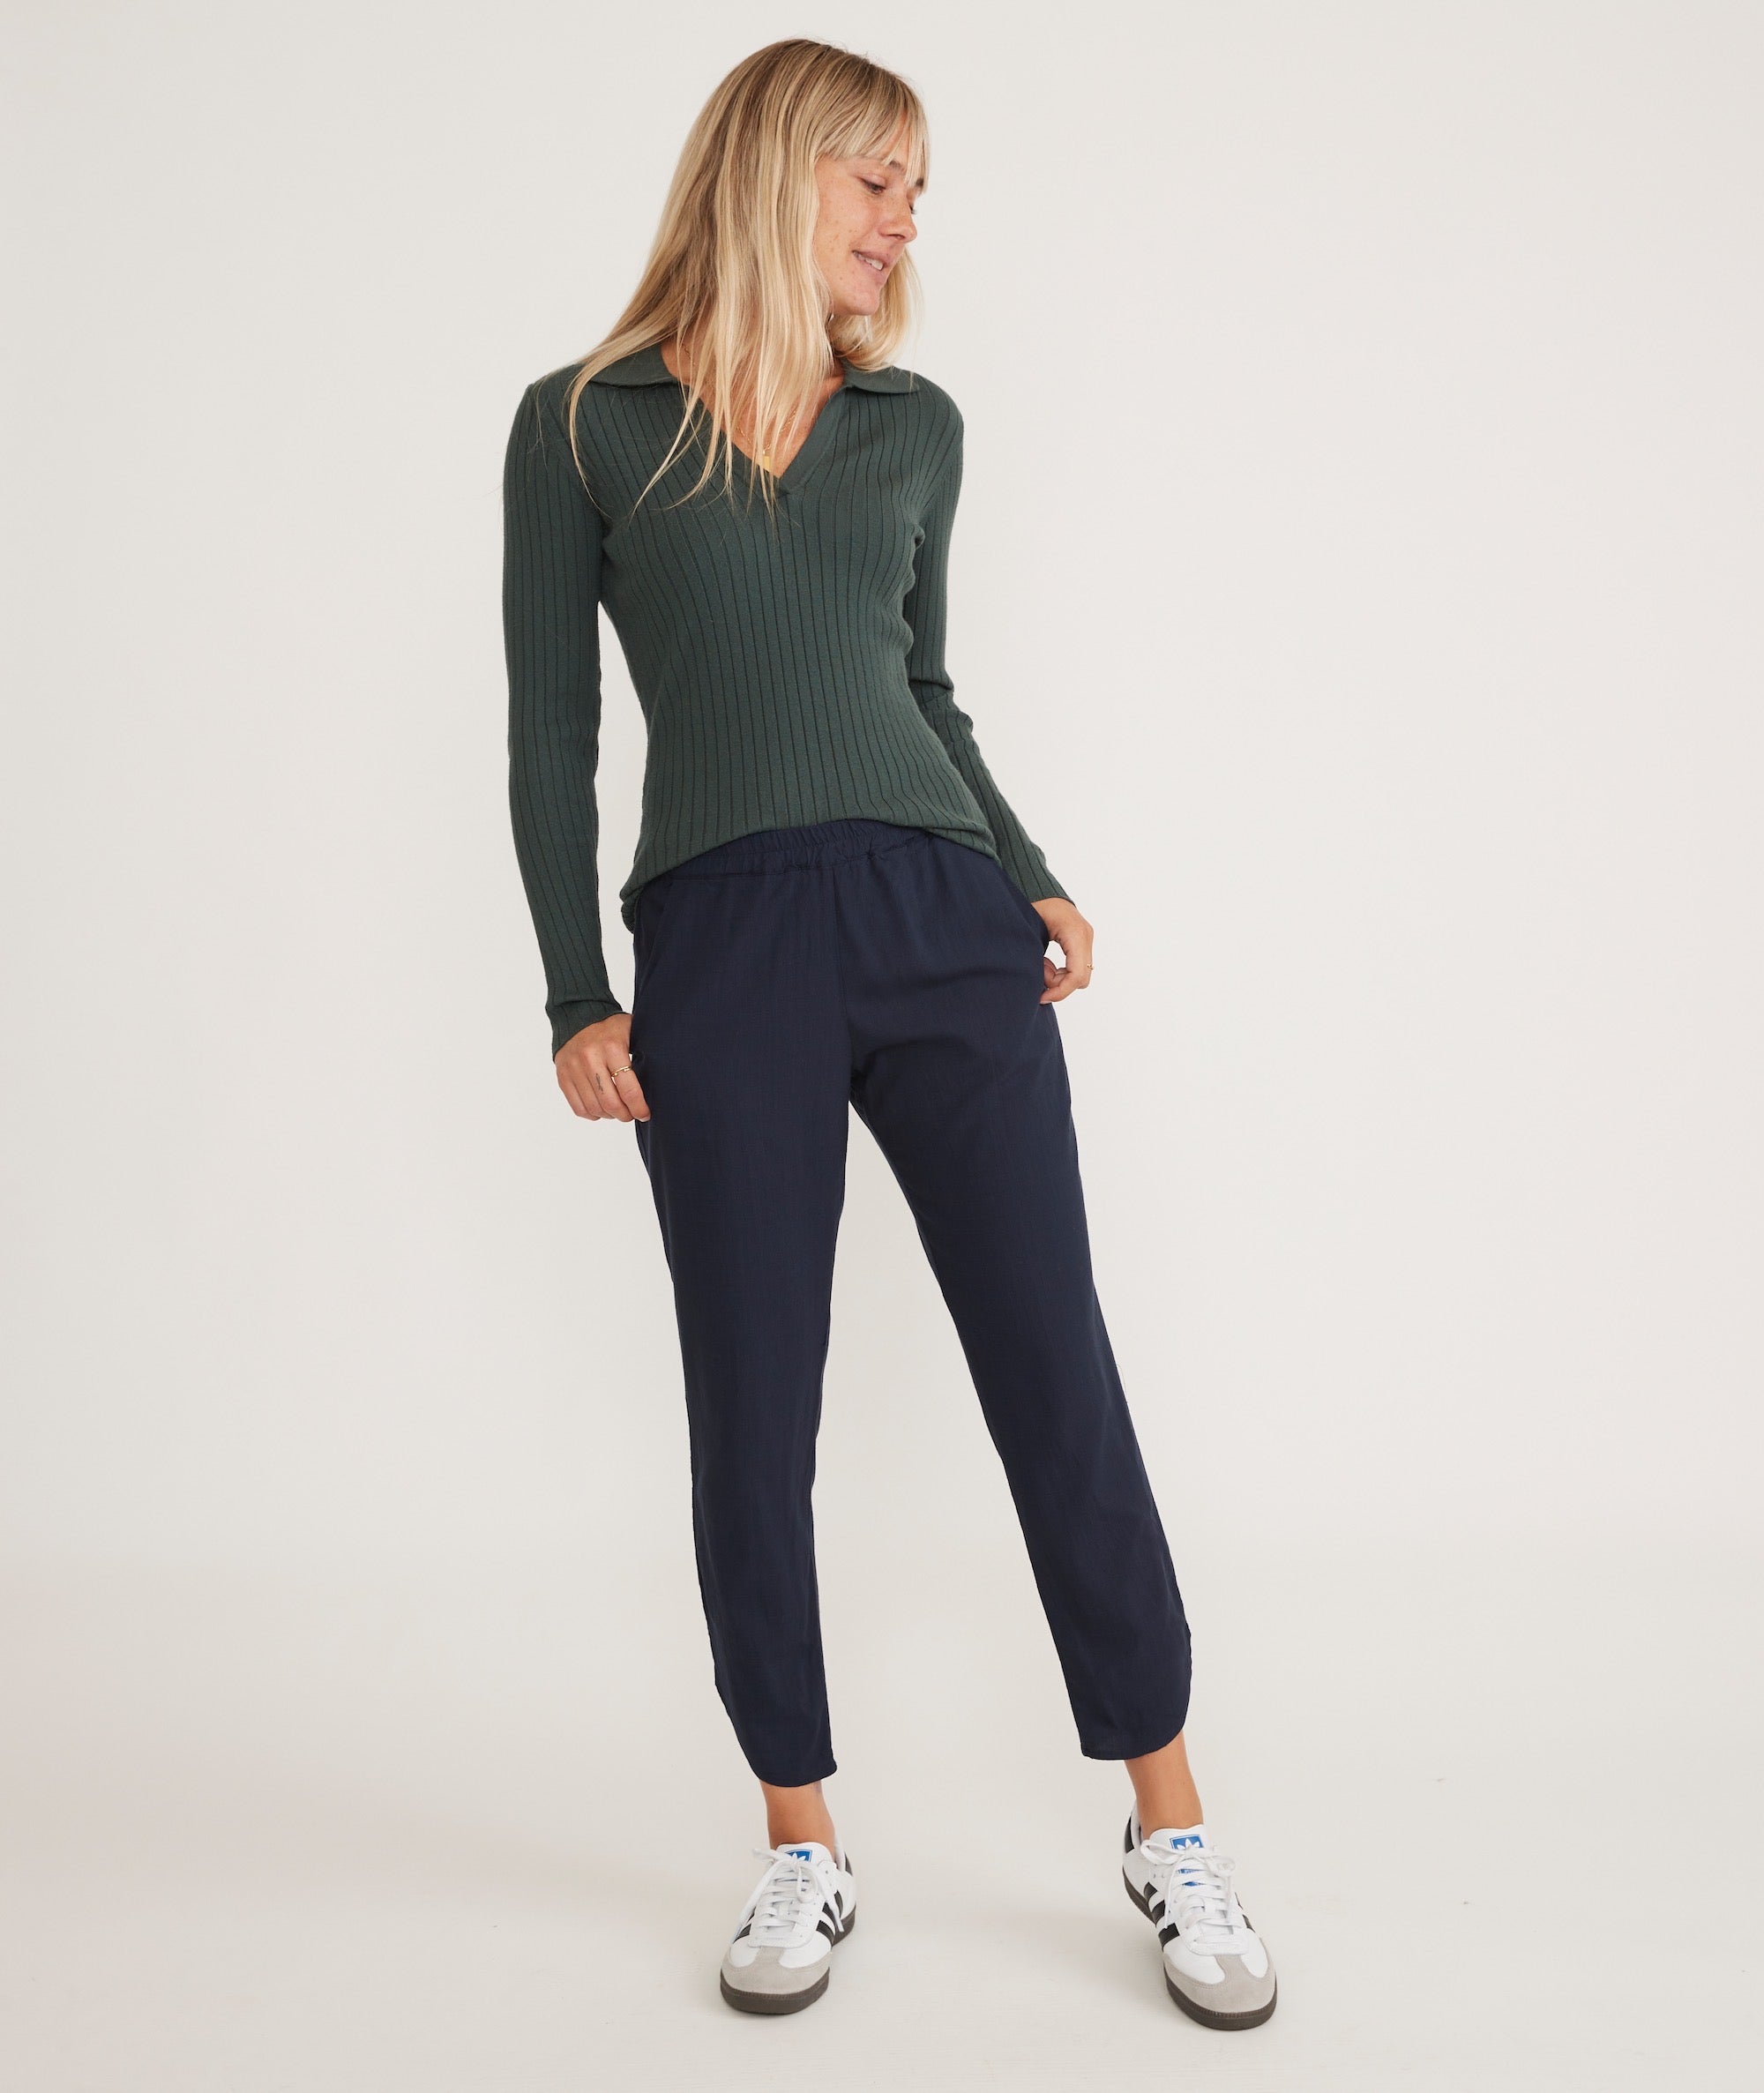 Re-Spun Tall and Petite Layer Navy Pant Allison in Marine –